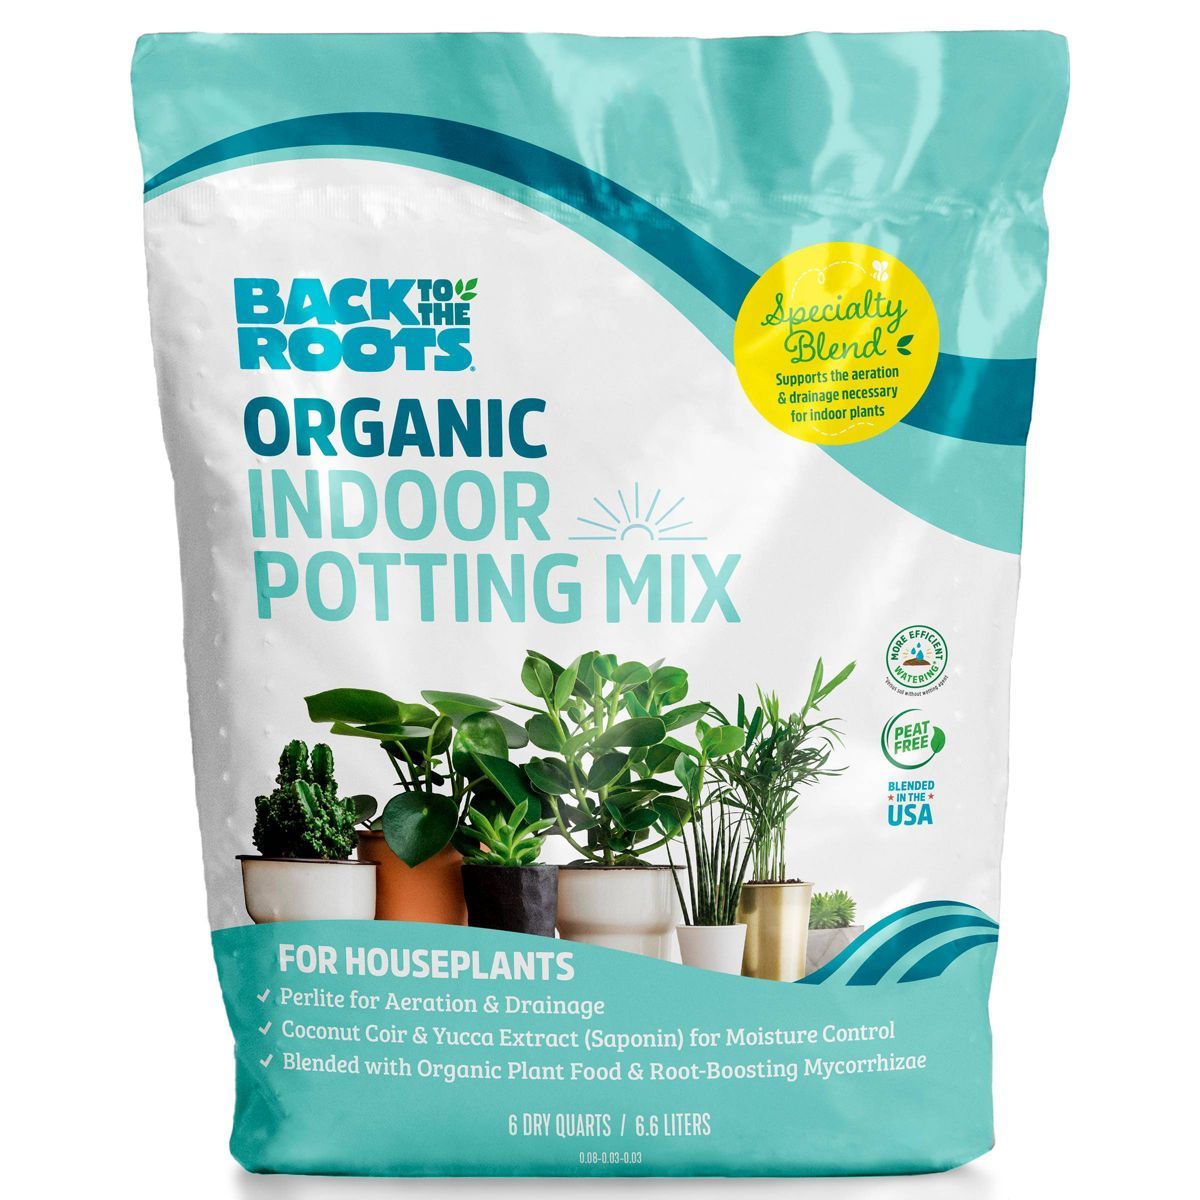 Back to the Roots 6qt Organic Indoor Potting Mix For Houseplants Specialty Mix | Target